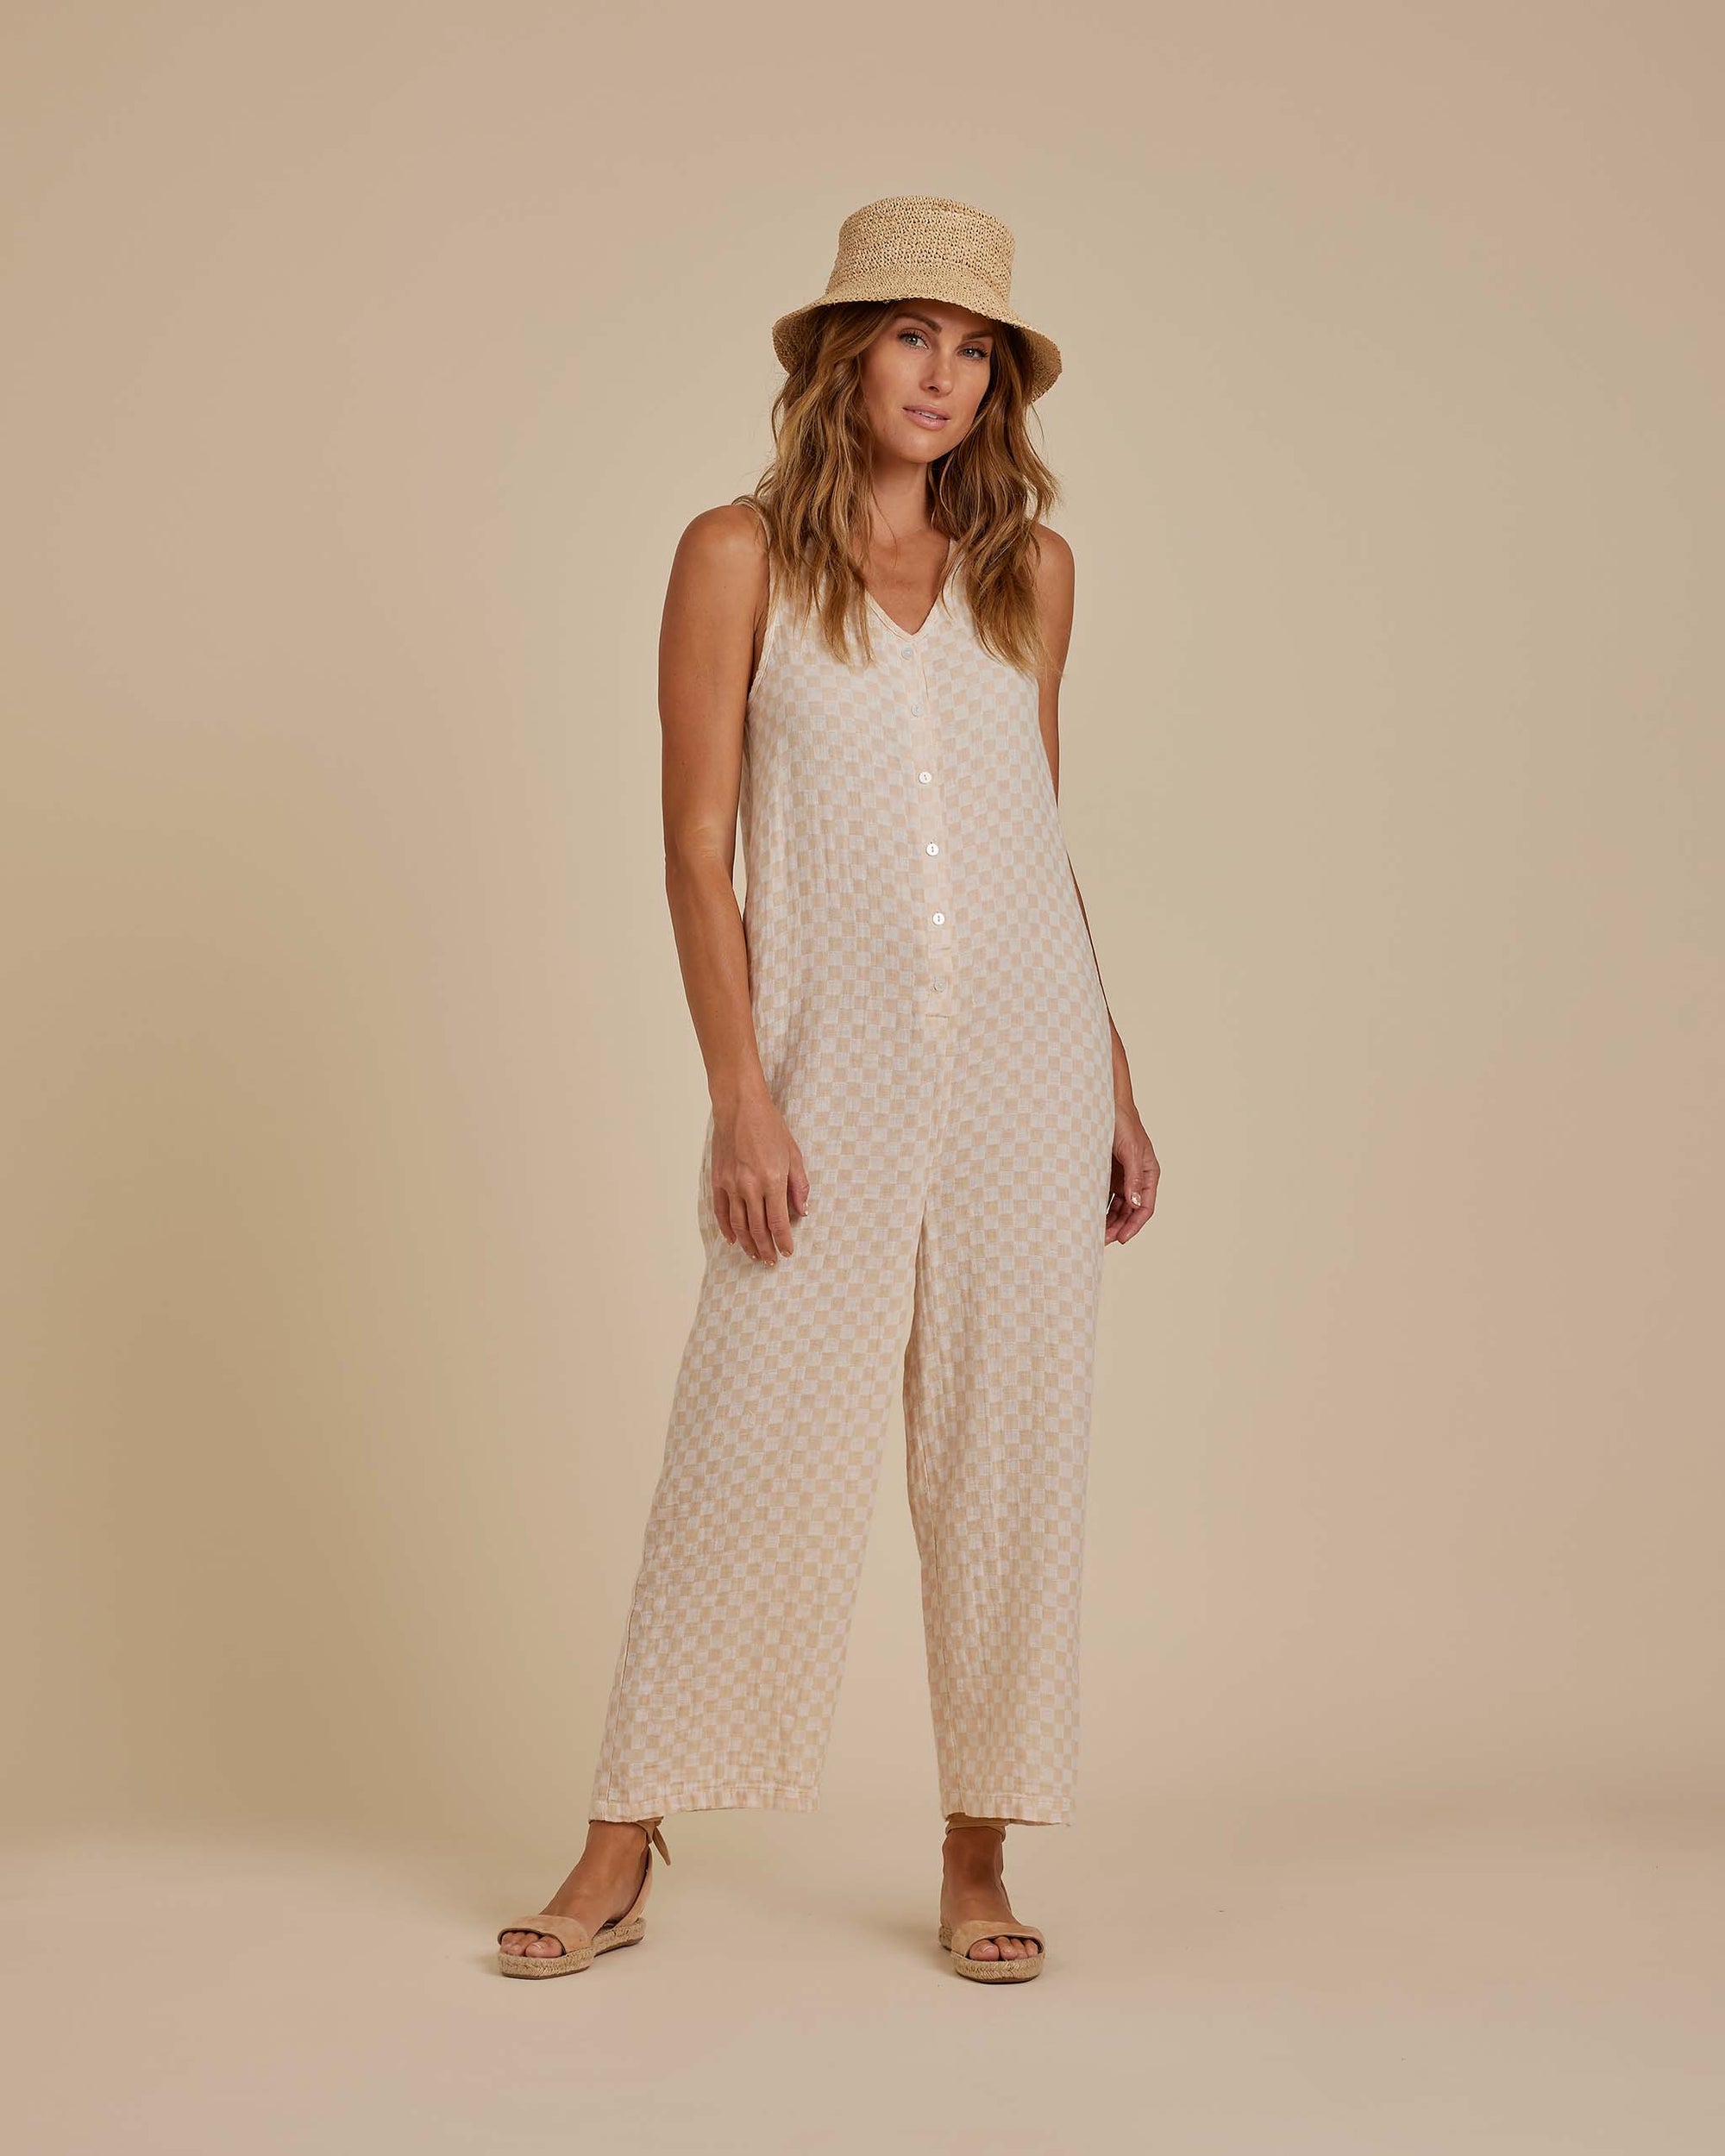 Women's jumpsuit in shell check print